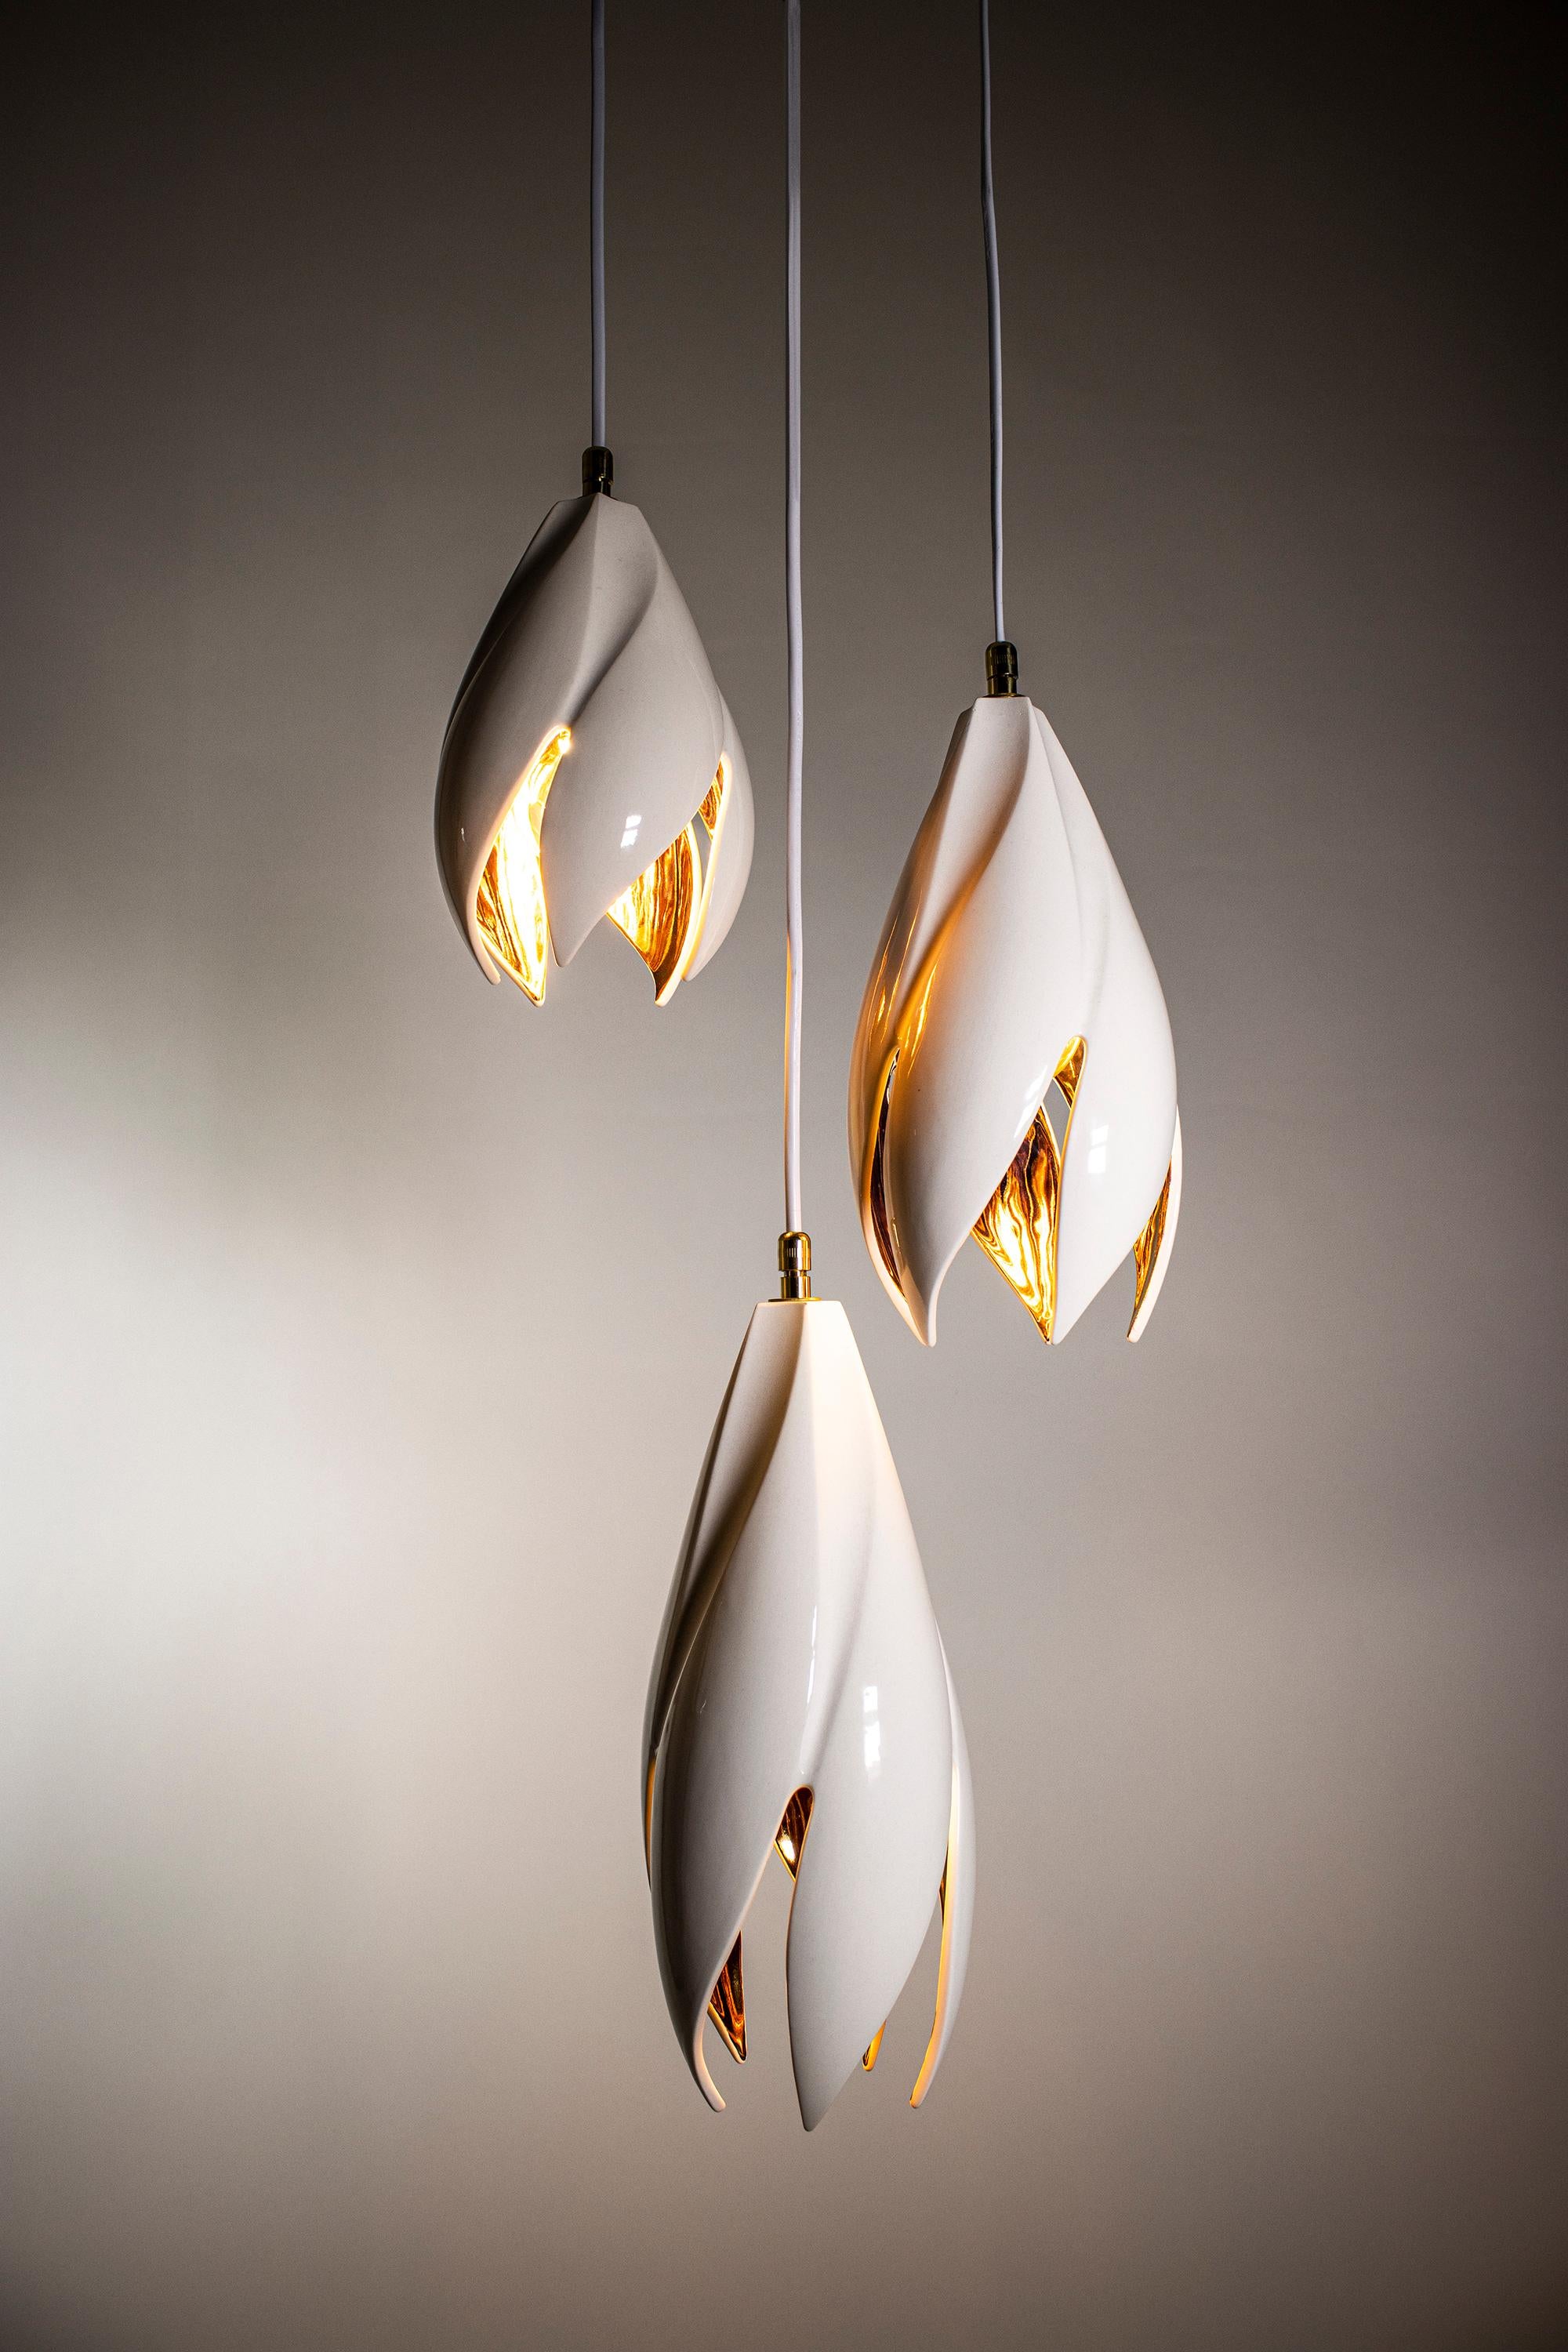 The twist pendants are designed to be an elegant lighting solution for any space. These pendants are designed to be hung alone, in pairs, trios, or clusters, making them a versatile addition to any room. Their simple yet striking twisted design